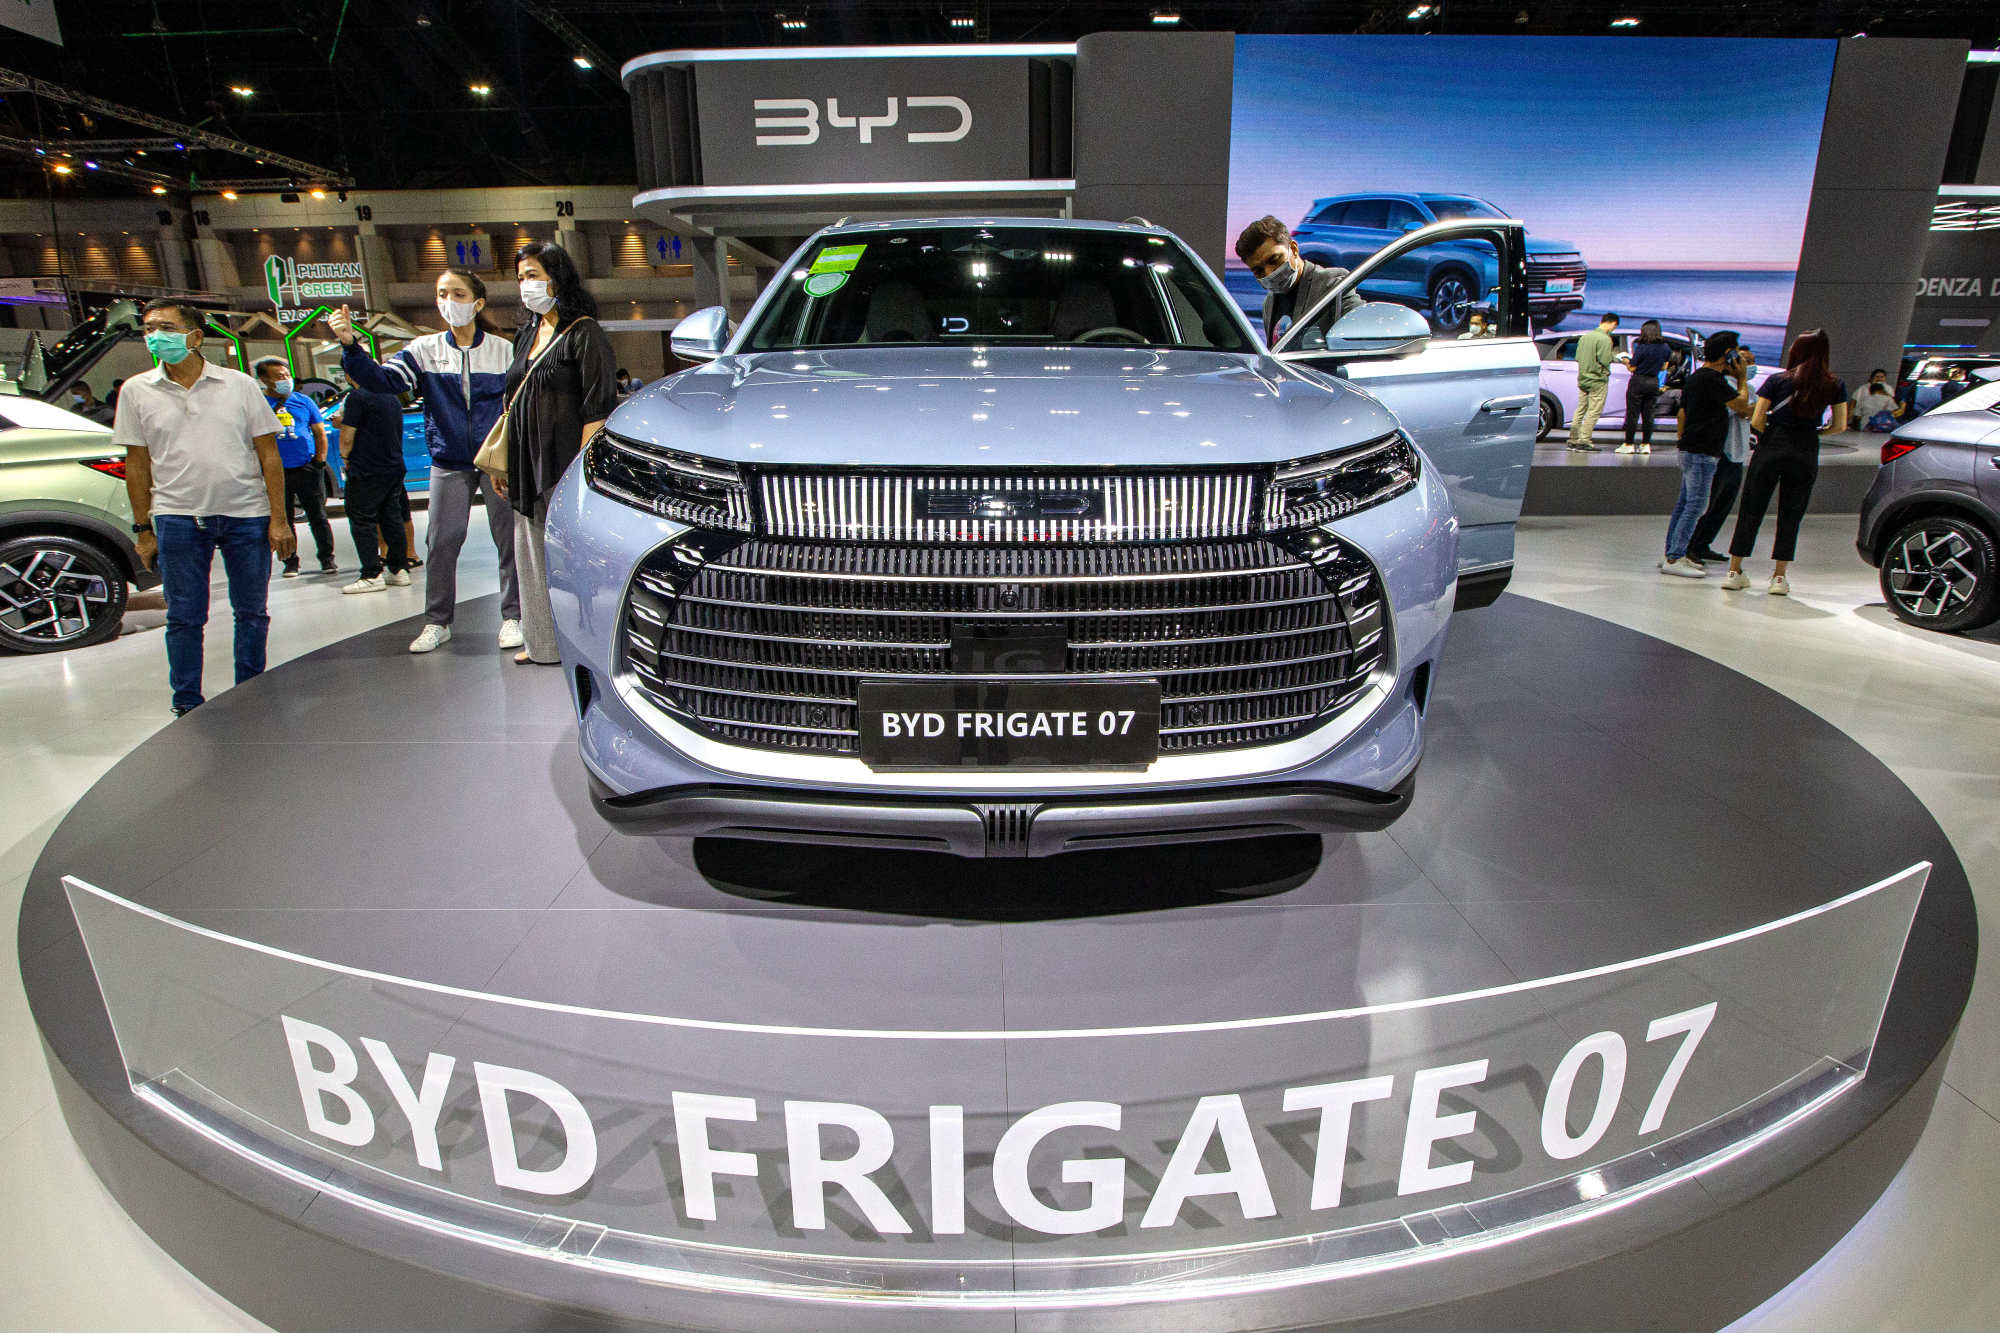 BYD’s Frigate 07 sports utility vehicle from its Ocean series, on display at the 44th Bangkok International Motor Show on March 22, 2023. Photo: Xinhua.